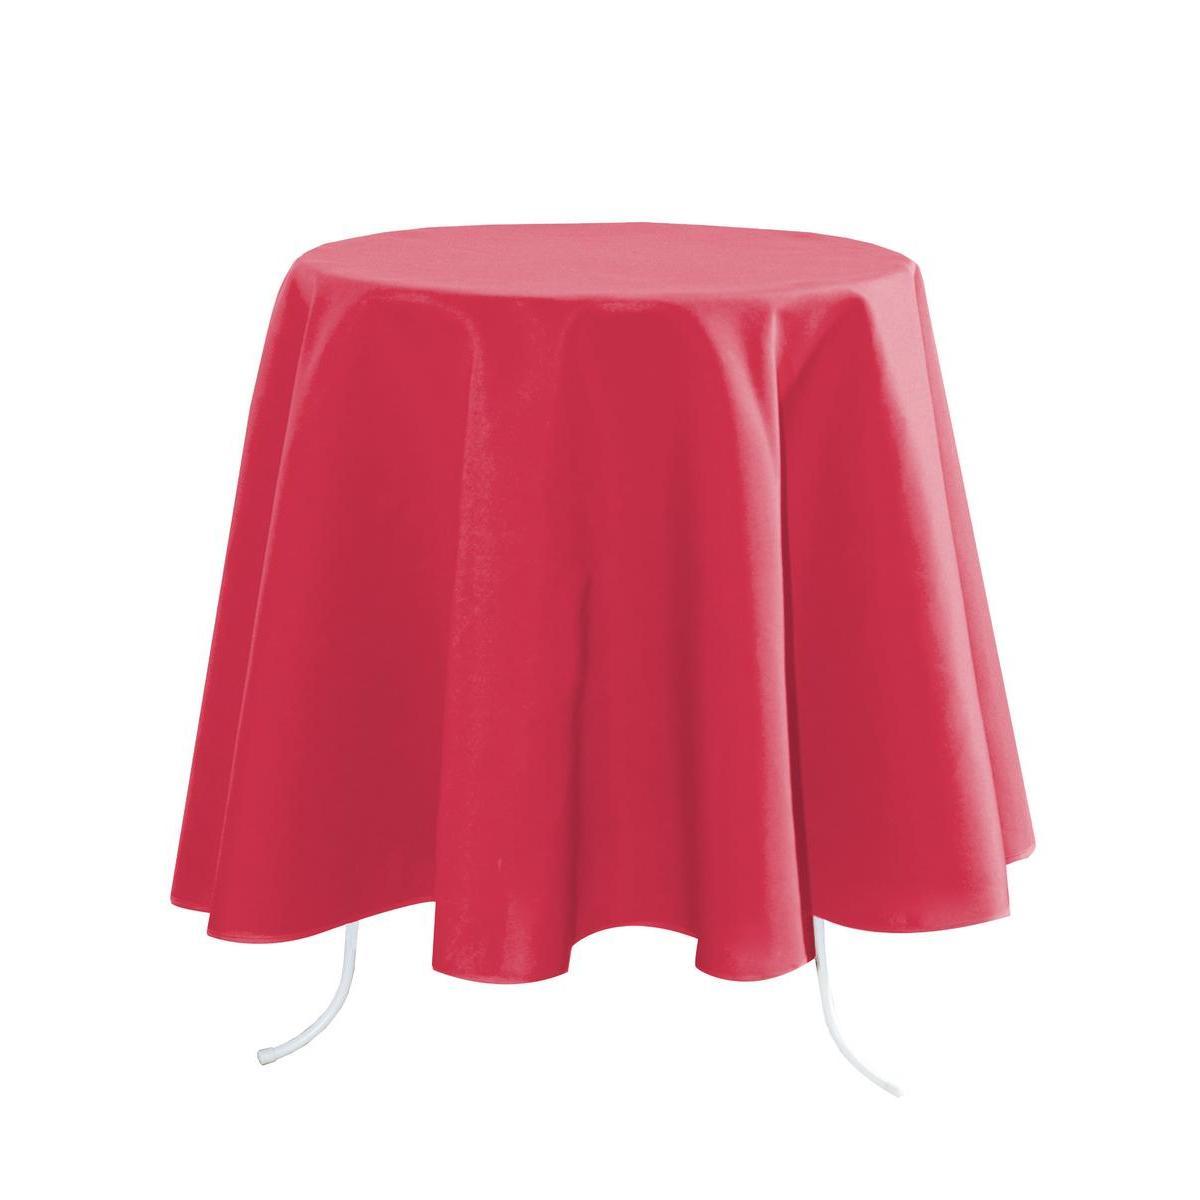 Nappe rectangulaire - 100 % Polyester - 148 x 240 cm - Rouge